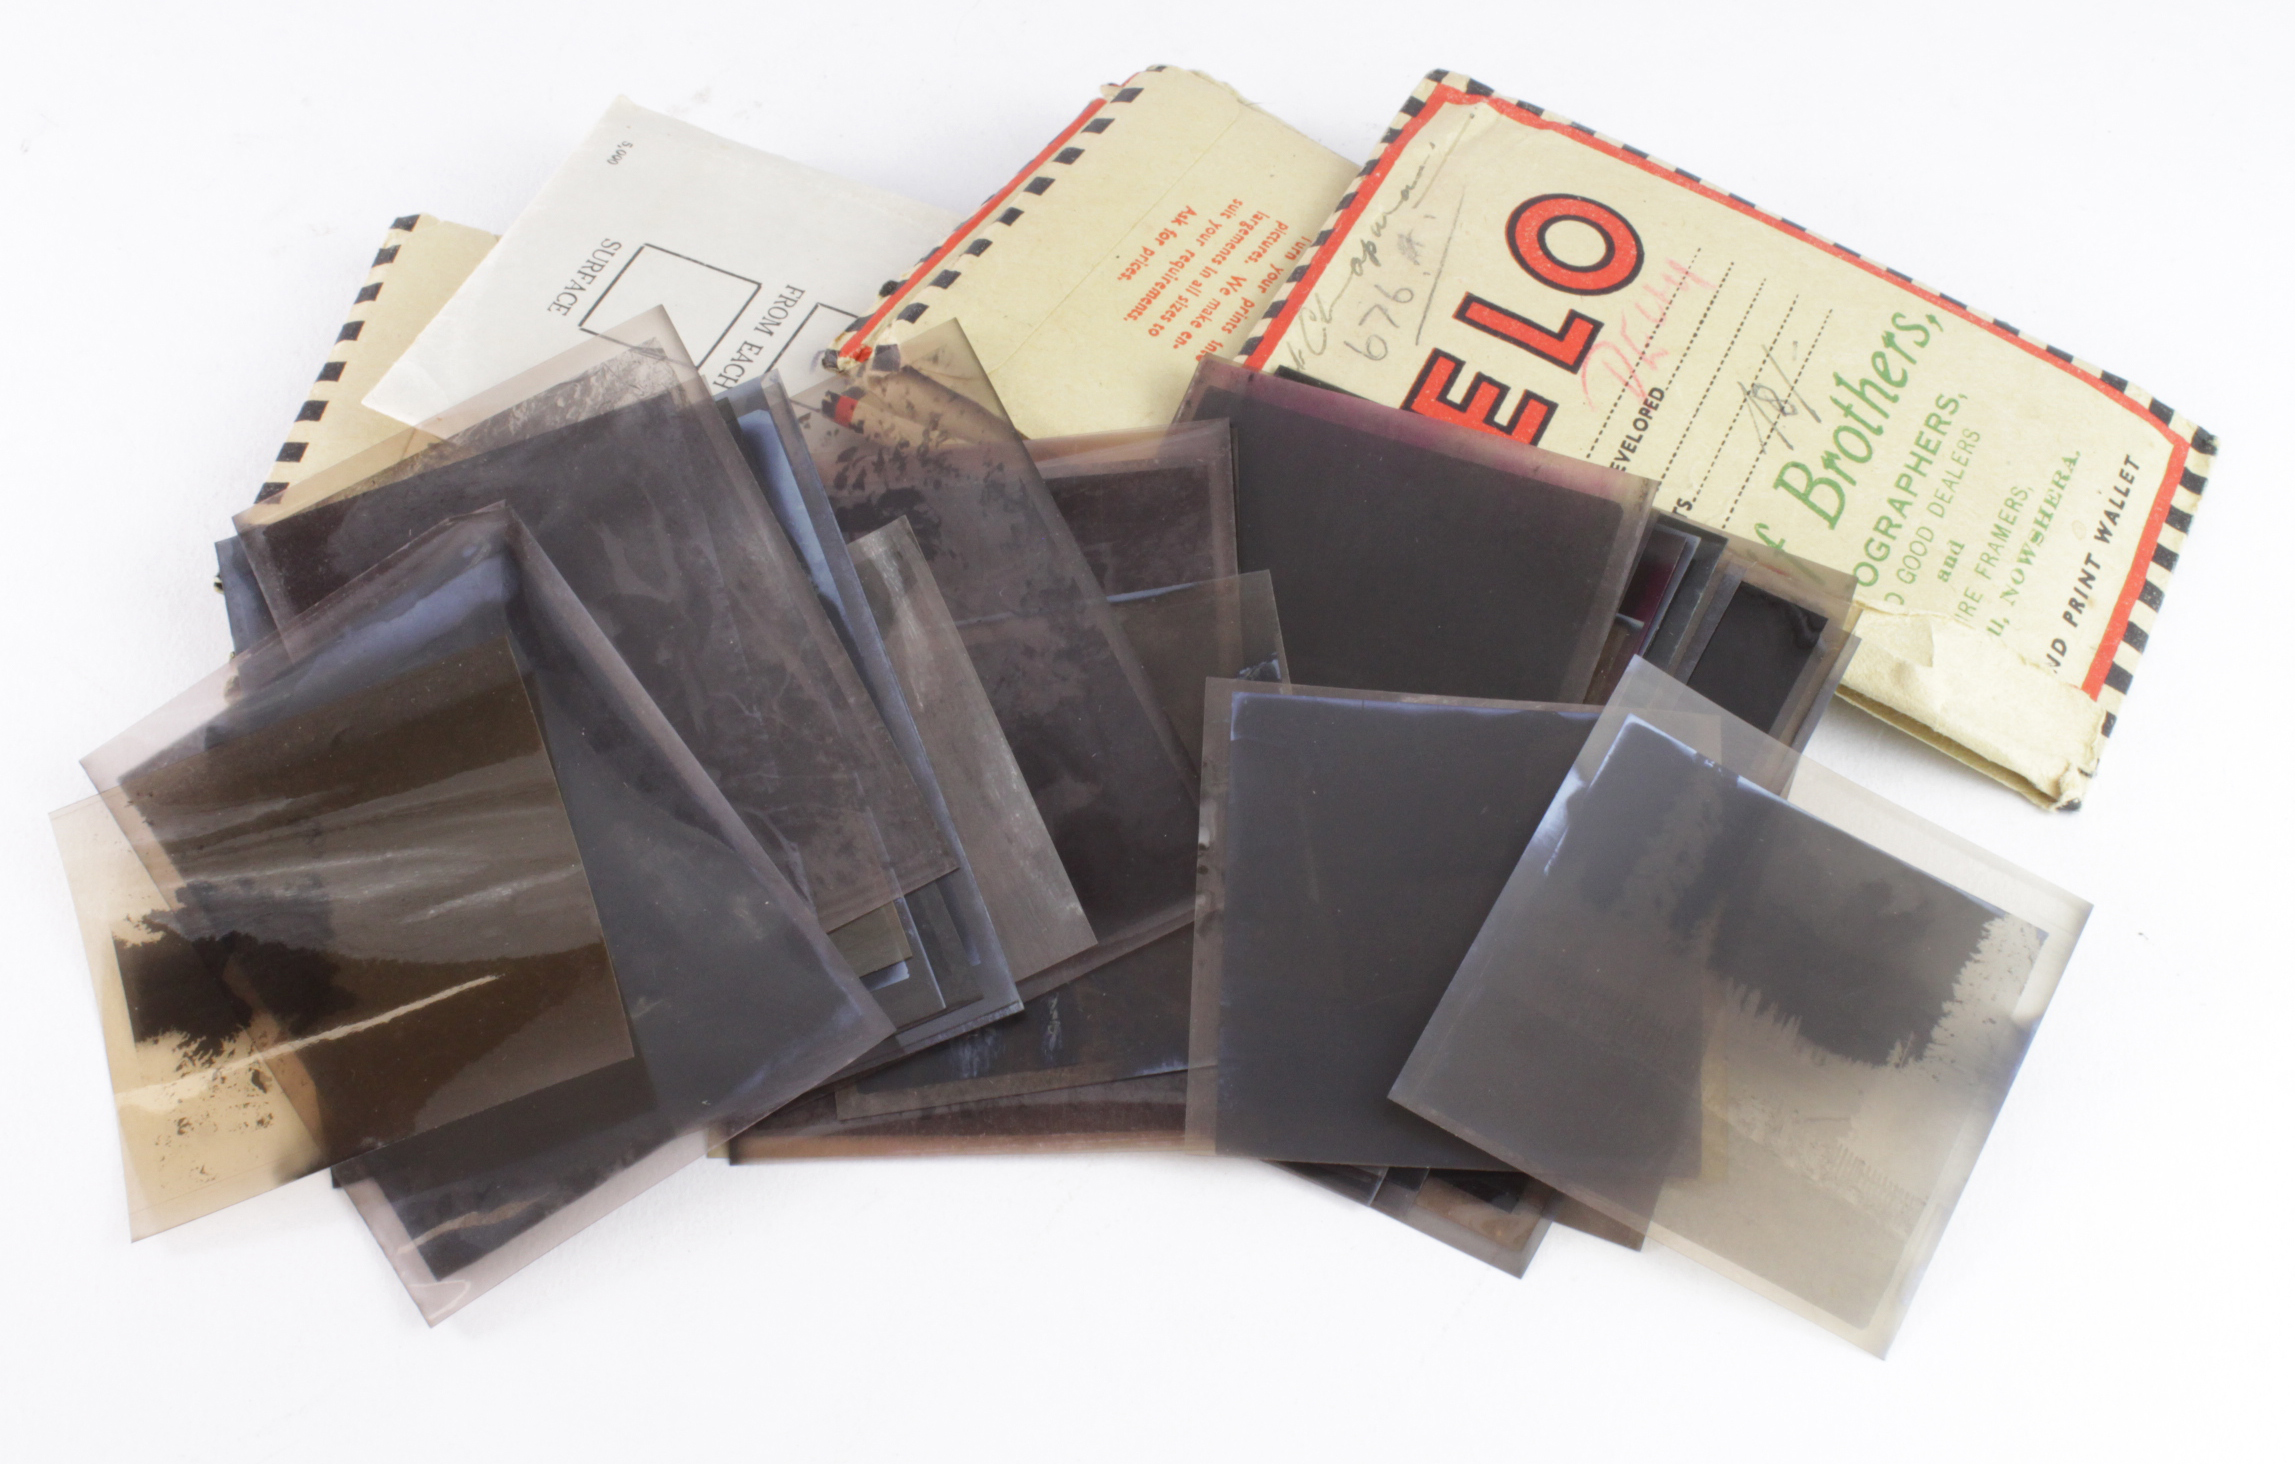 Military WW2 era b&w photographic negatives believed taken by Lt Chapman during his service in